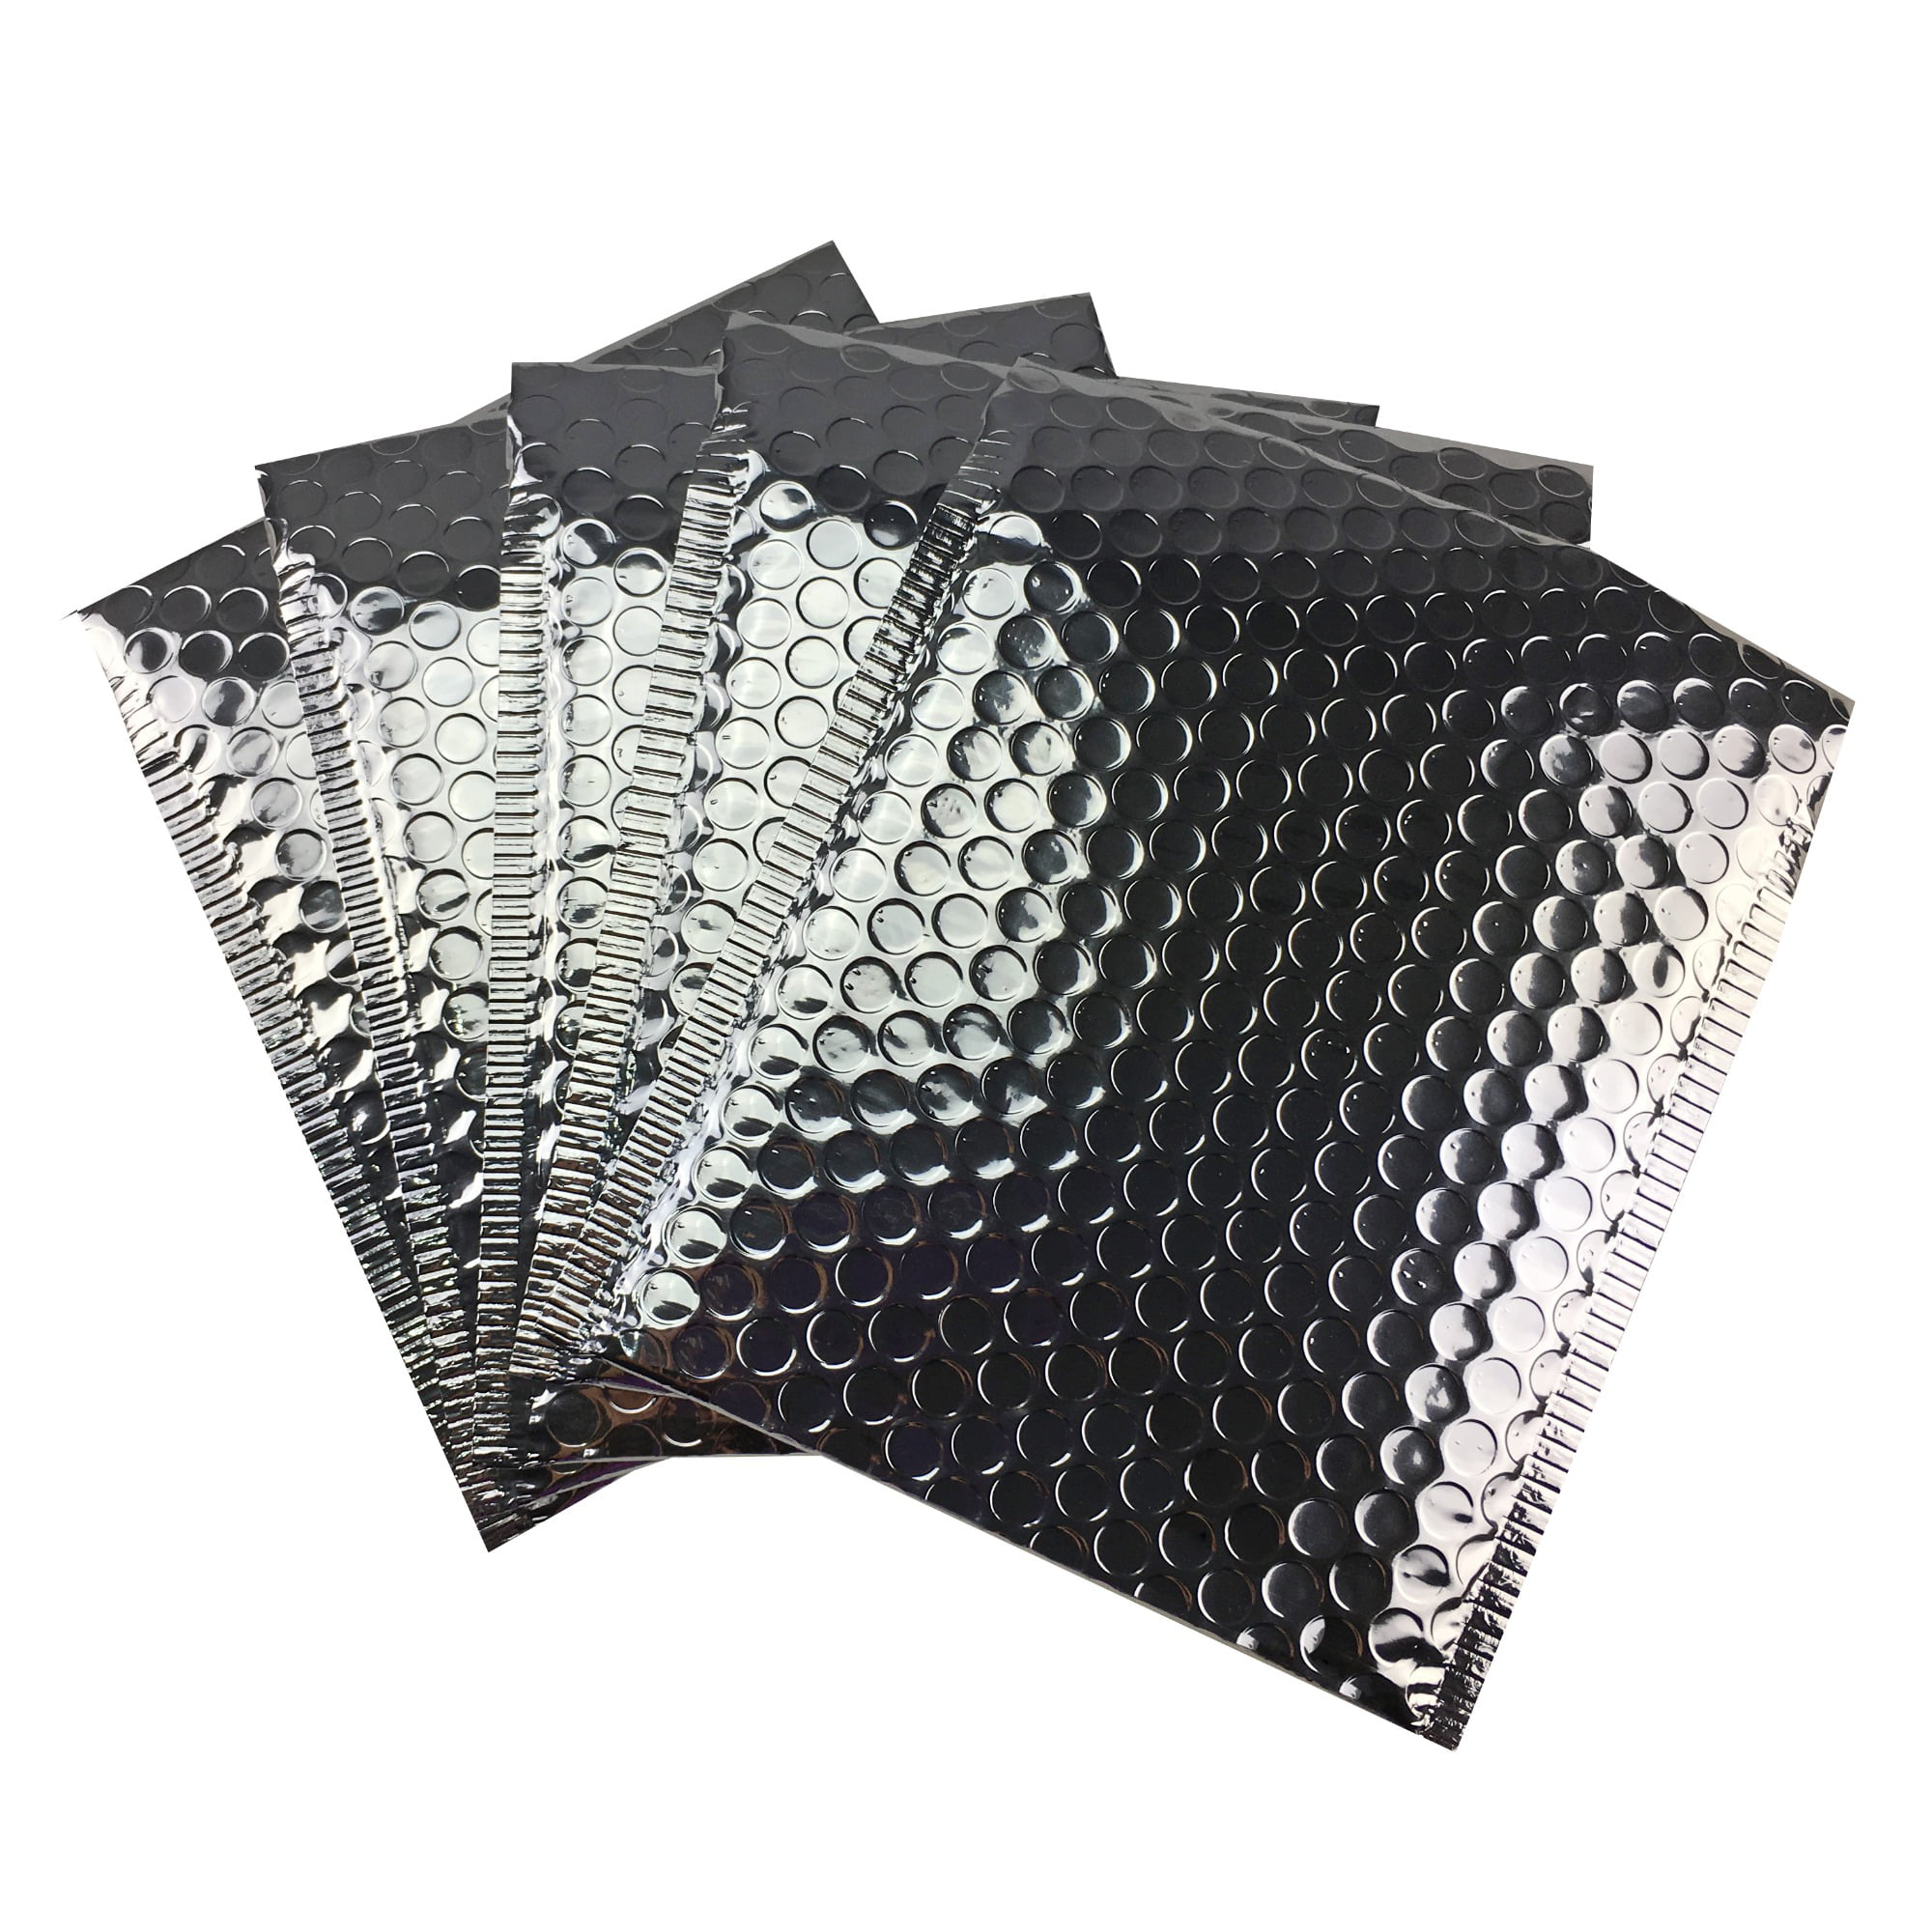 100 Metallic Glamour Bubble Mailers 9 x 11.5 Padded Black Envelope Shipping Bags 